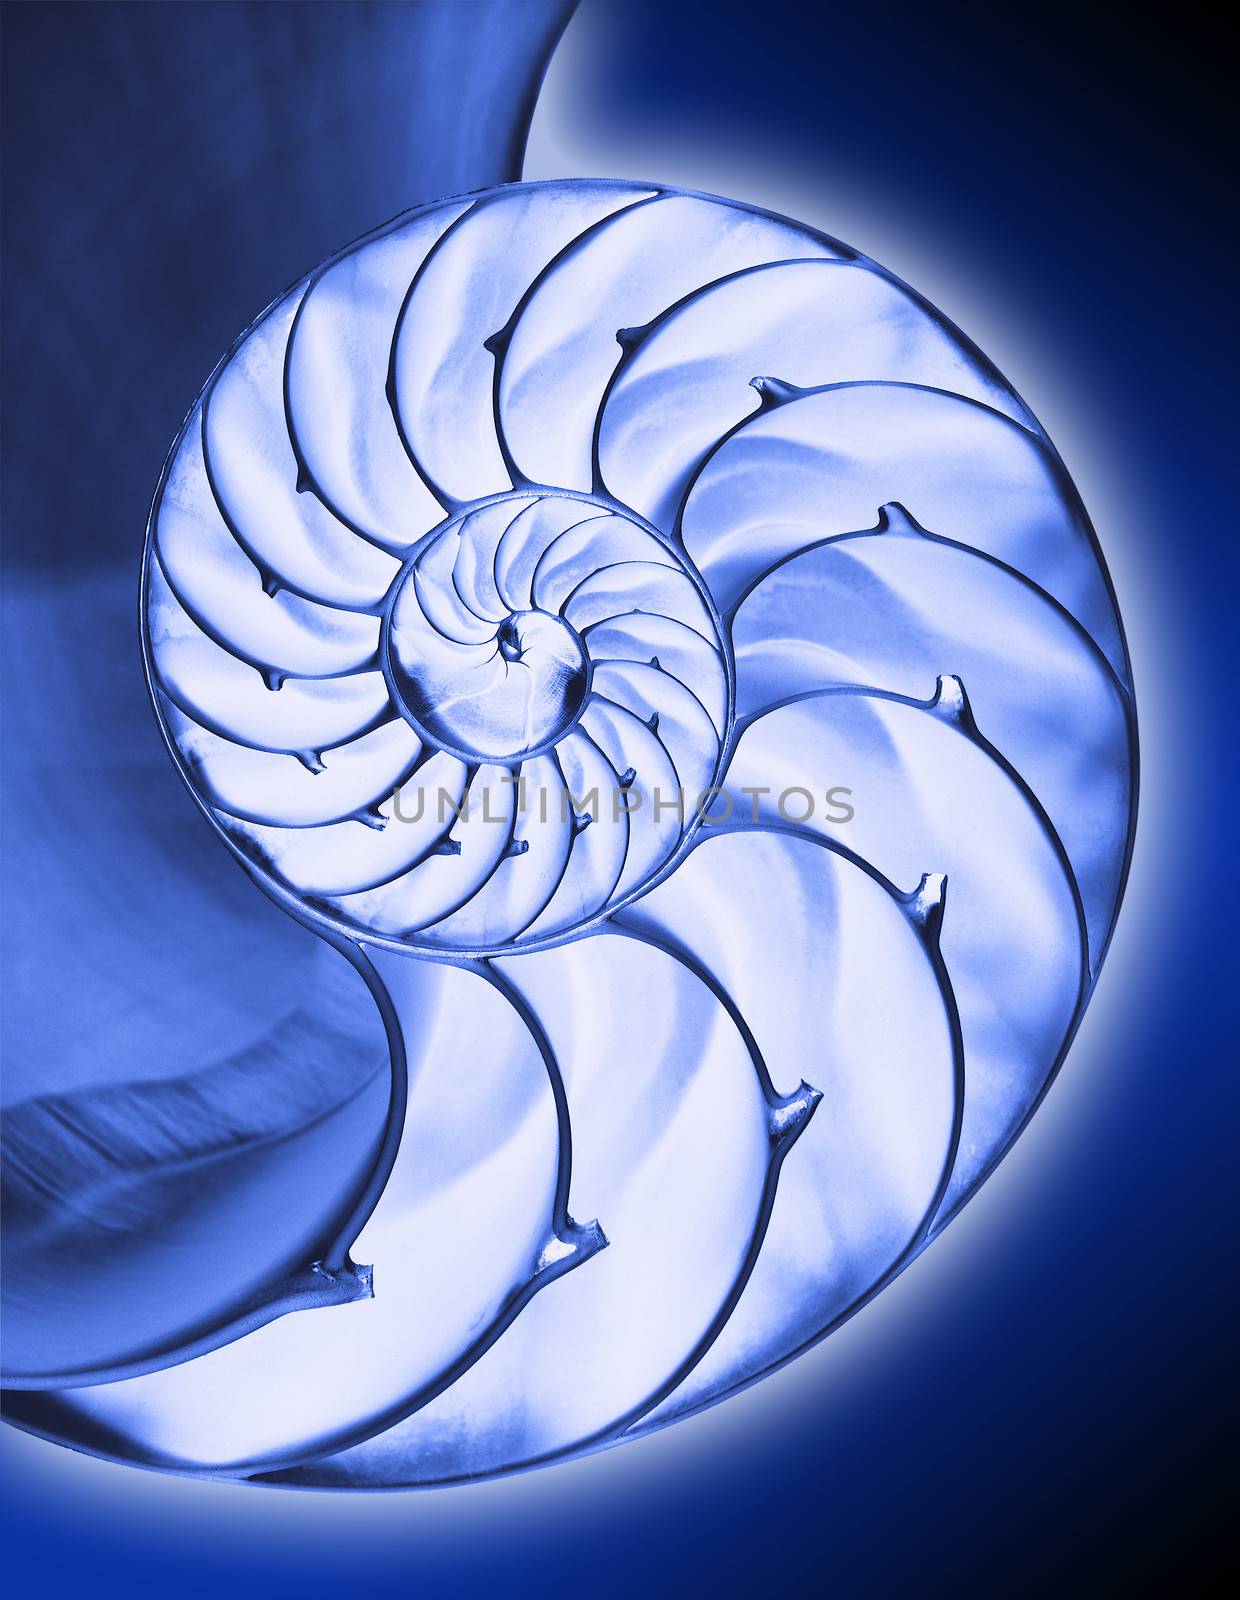 chambered nautilus interior in blue by f/2sumicron